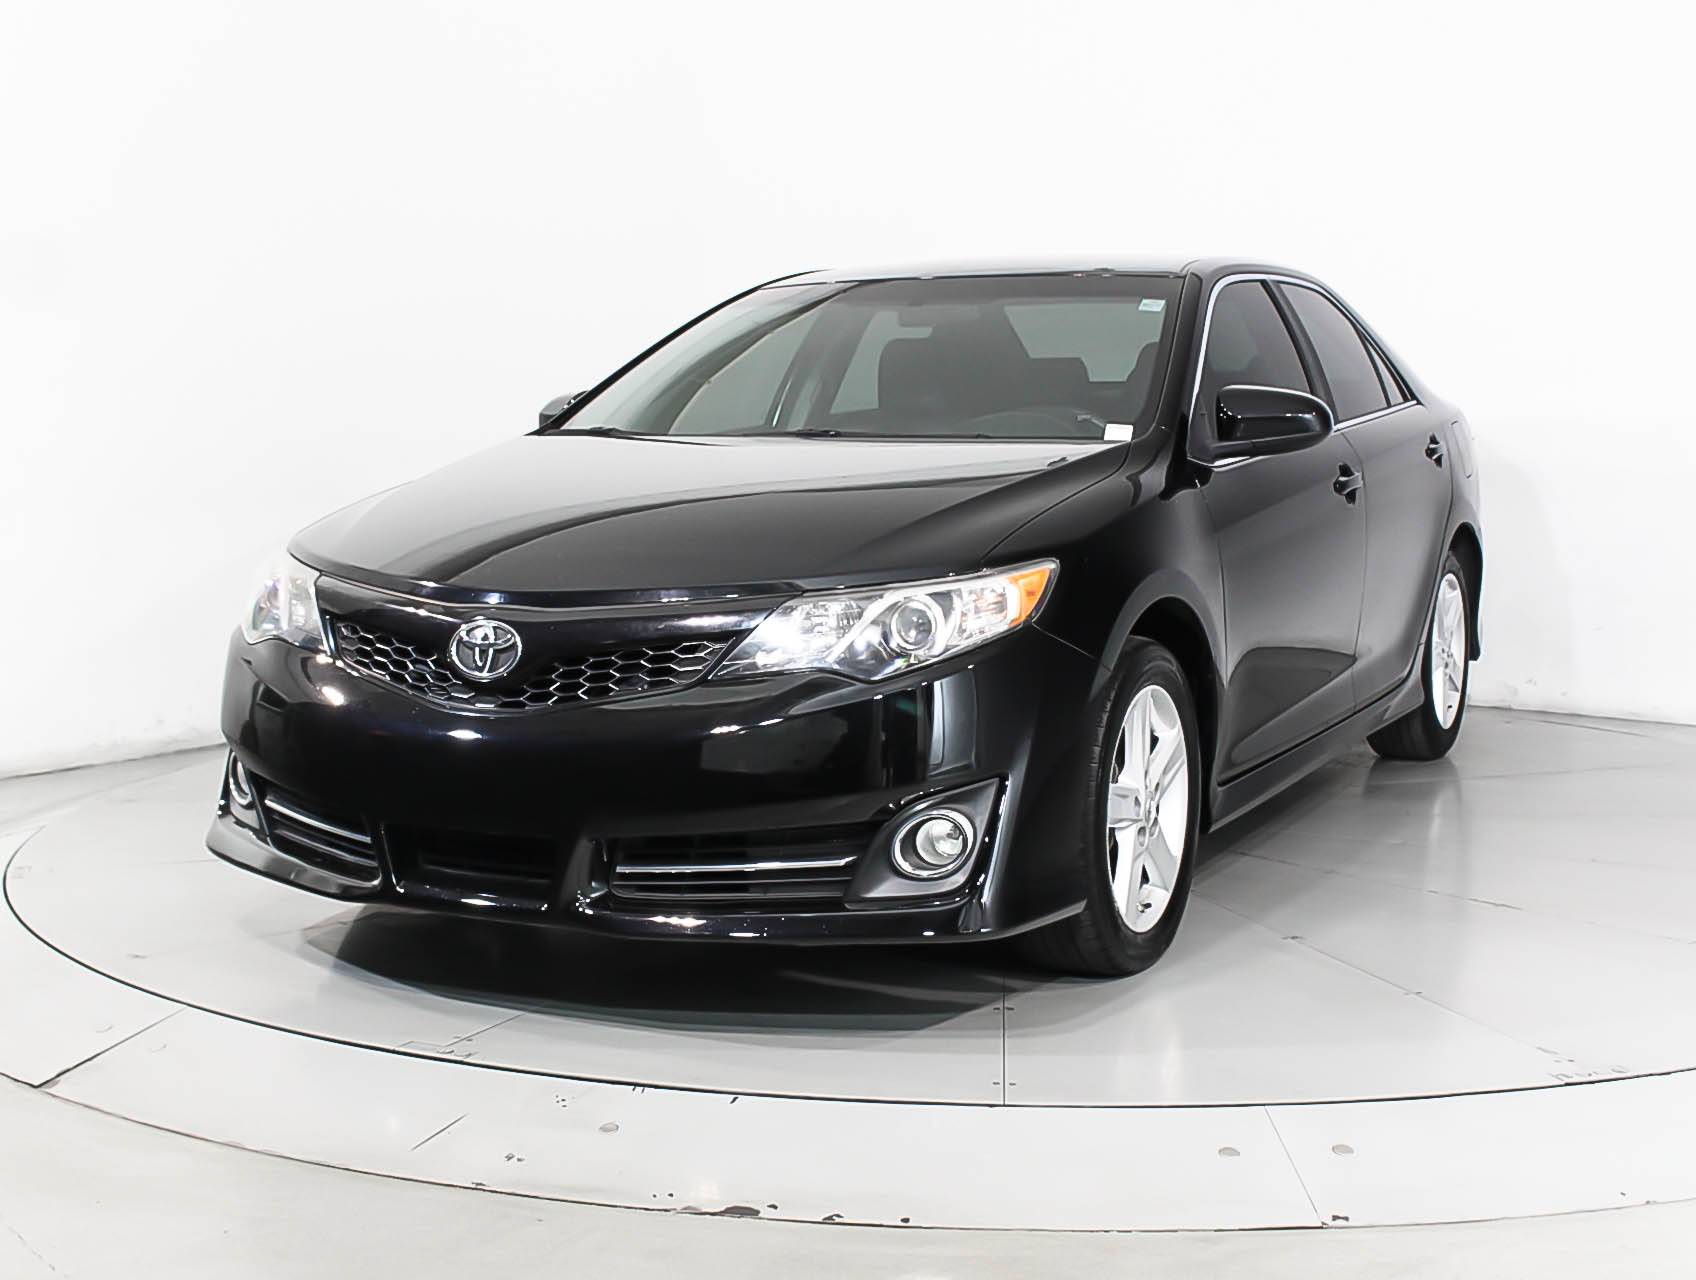 Florida Fine Cars - Used TOYOTA CAMRY 2014 WEST PALM Se